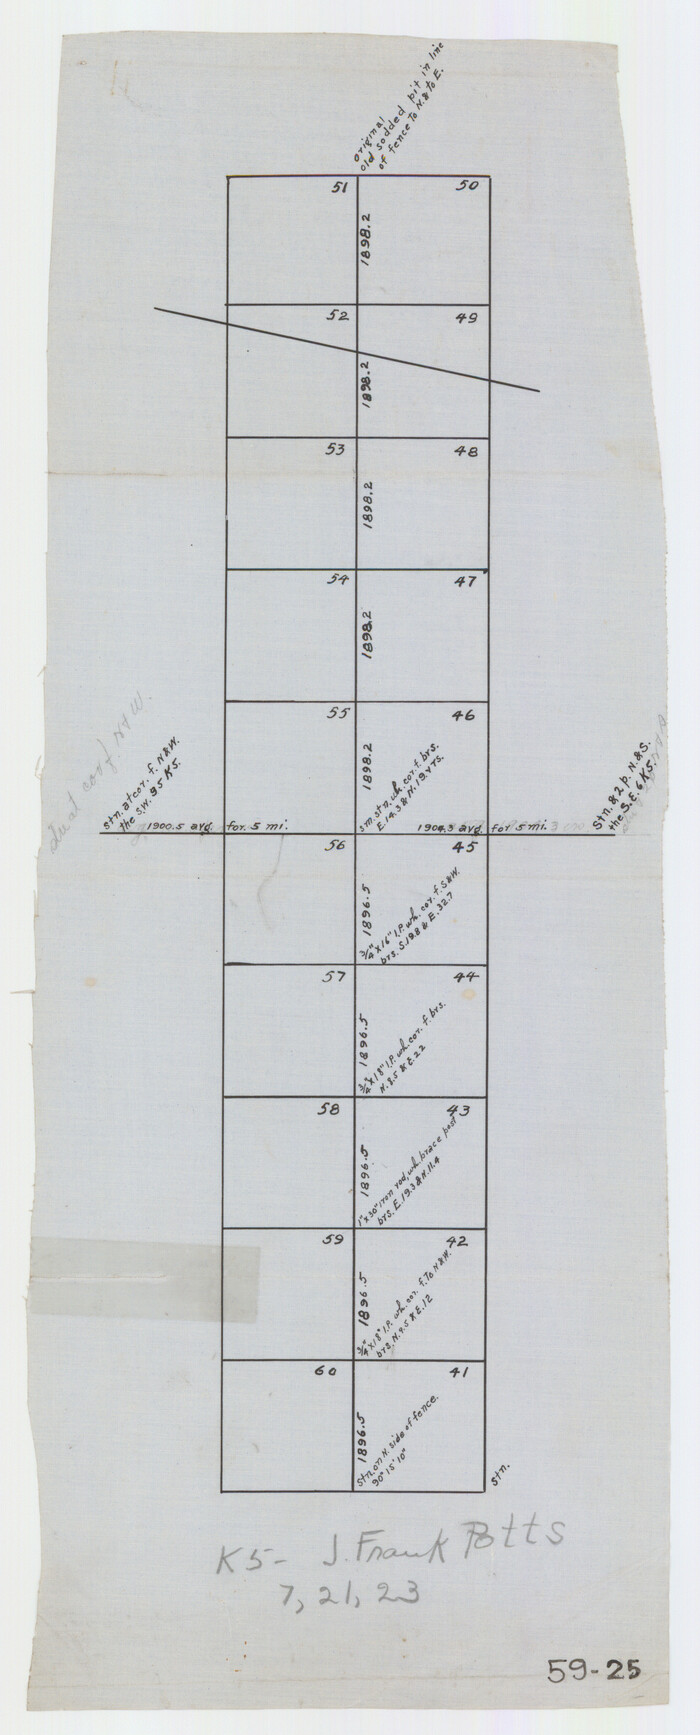 90600, [North/South line through middle of Block K5], Twichell Survey Records